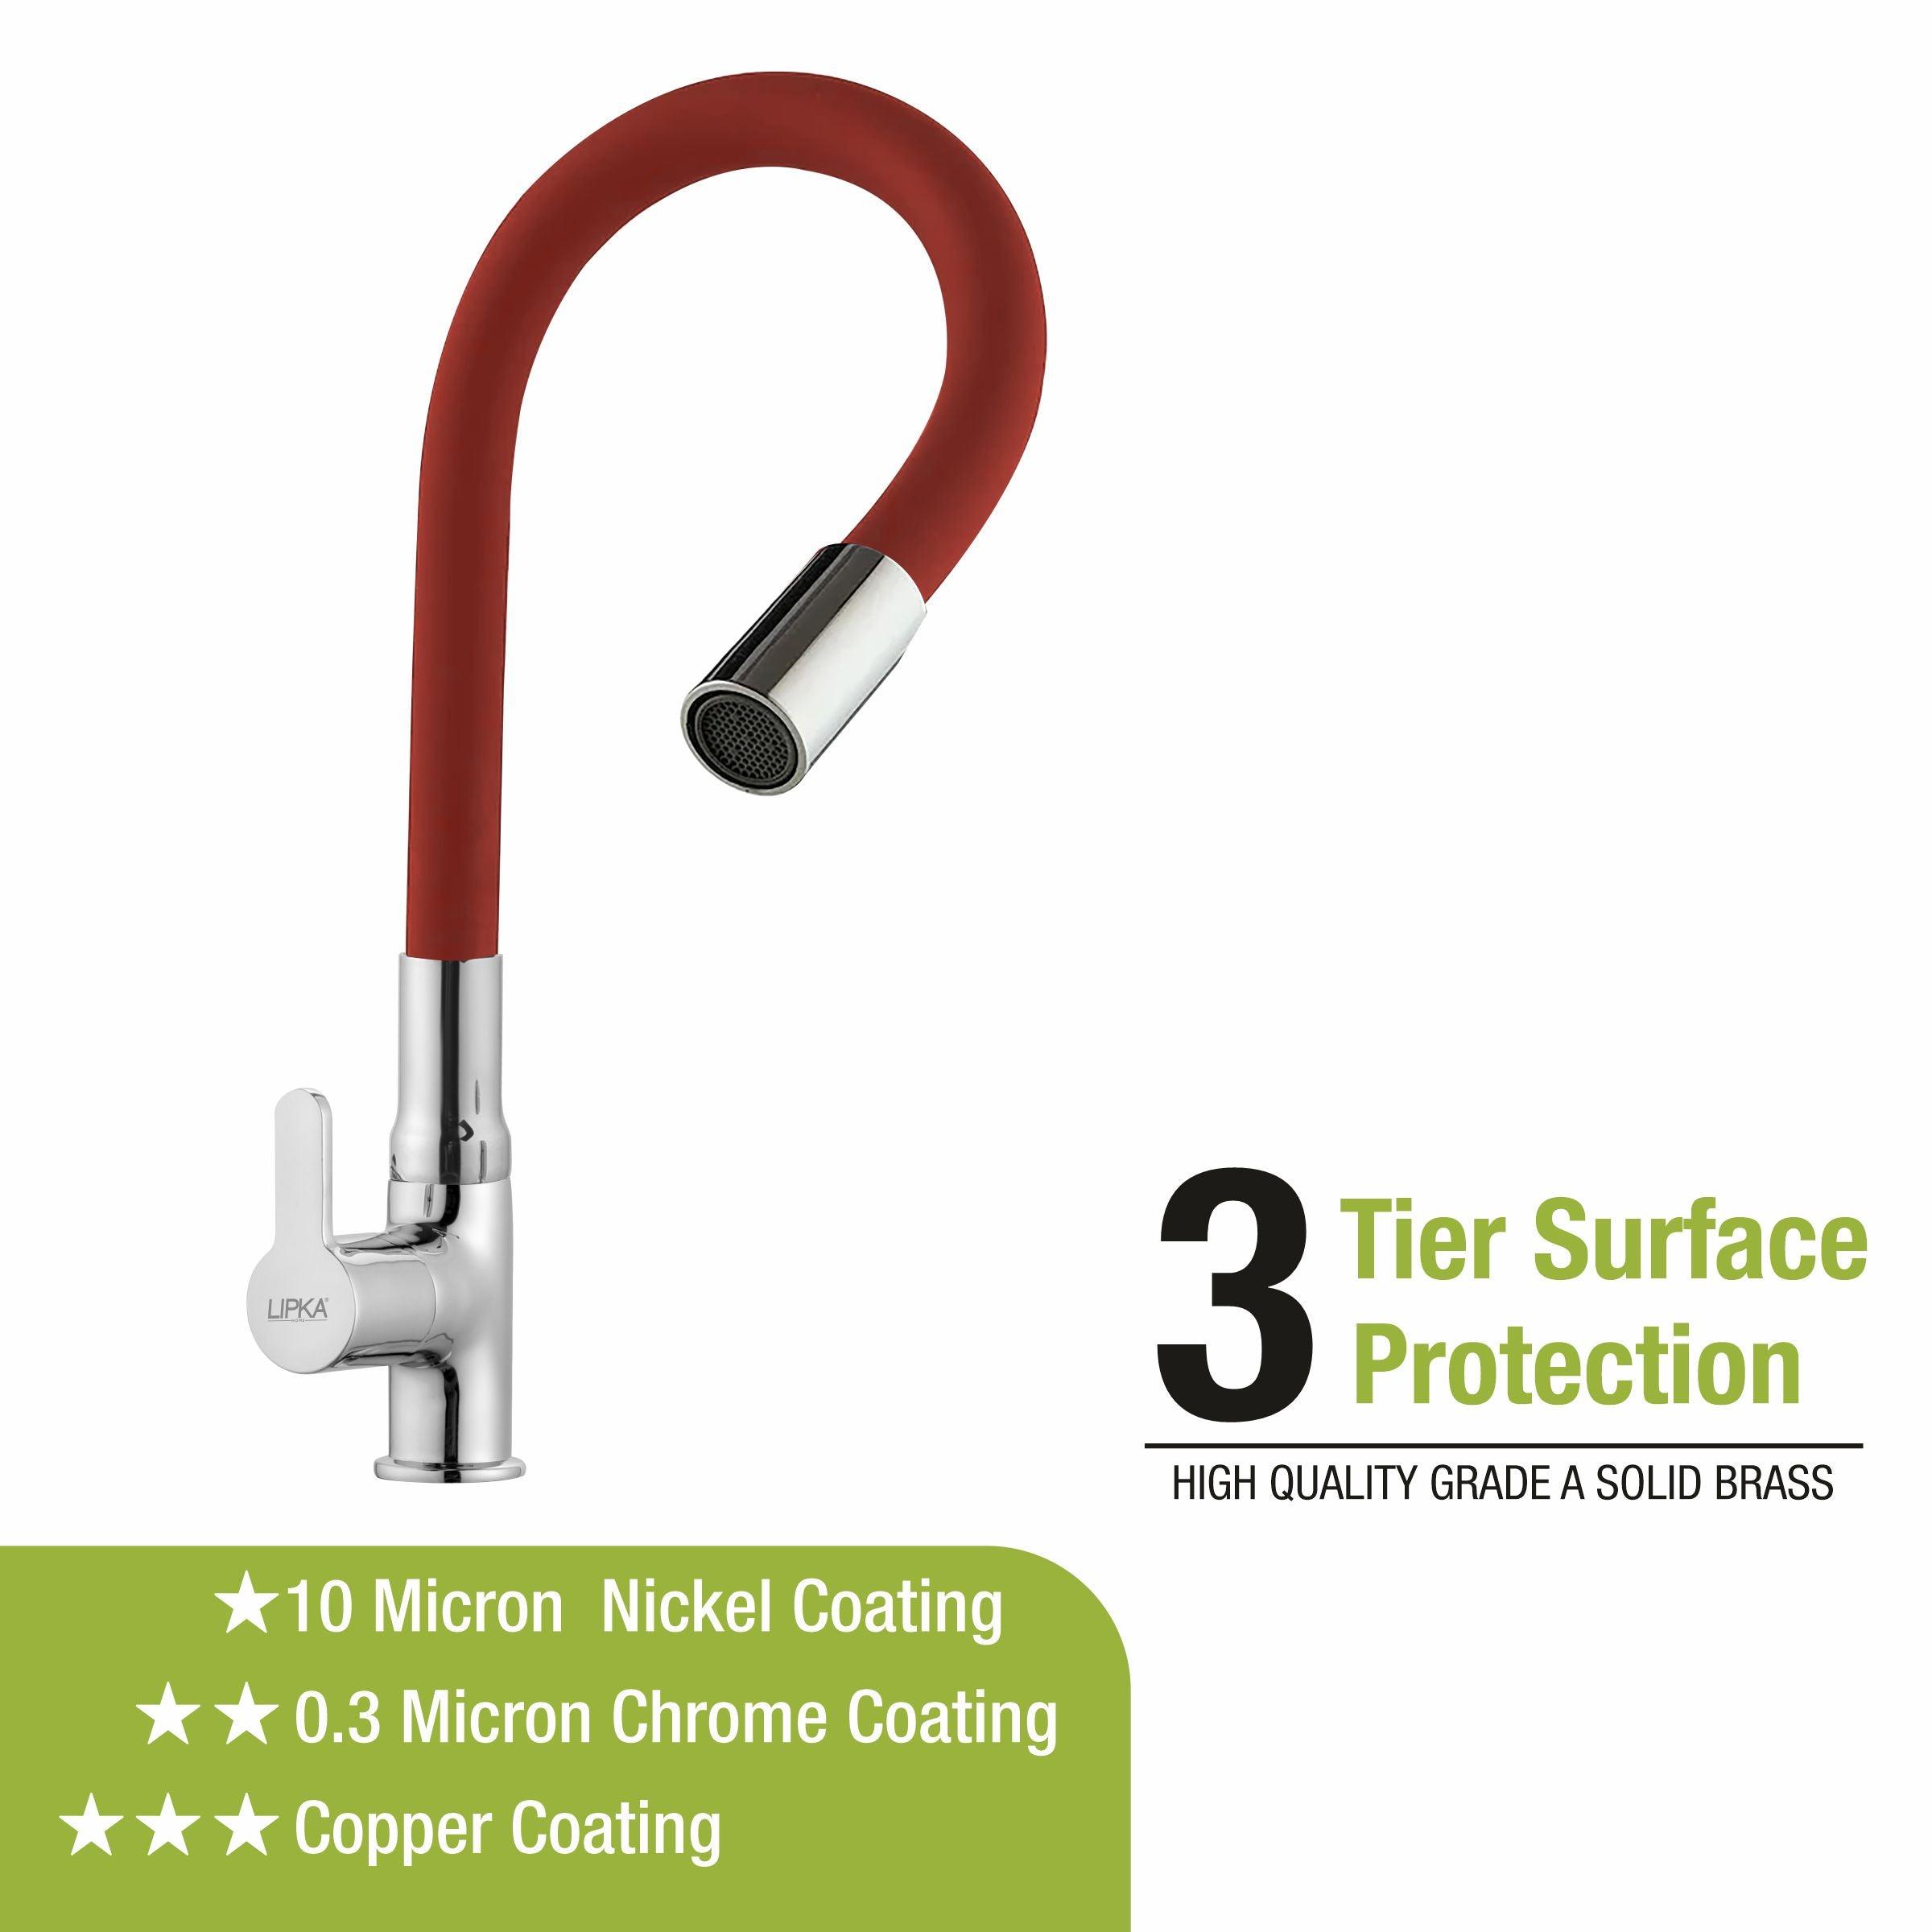 Fusion Swan Neck Brass Faucet with Flexible Silicone Spout (Red) - LIPKA - Lipka Home